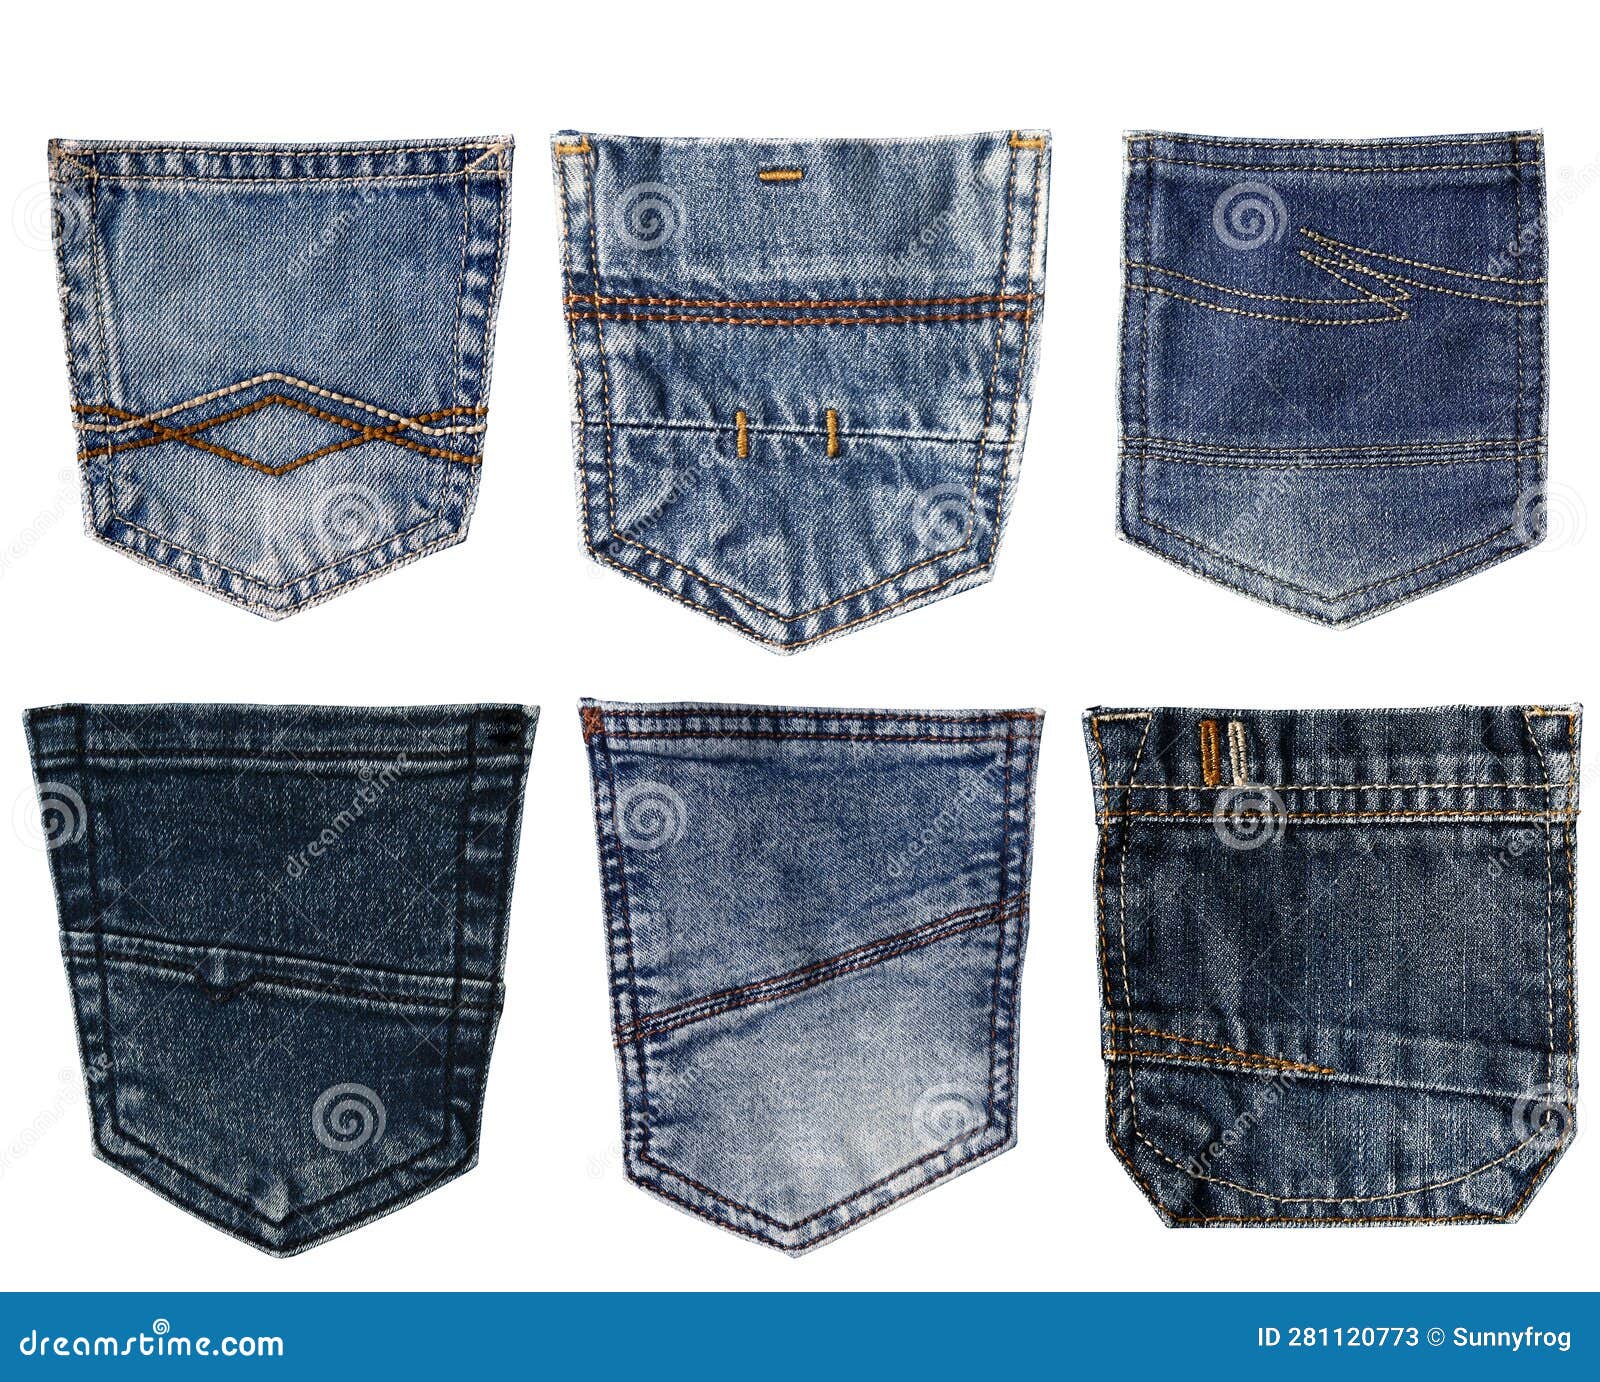 Why Jeans Have Those Tiny Pockets | Trusted Since 1922